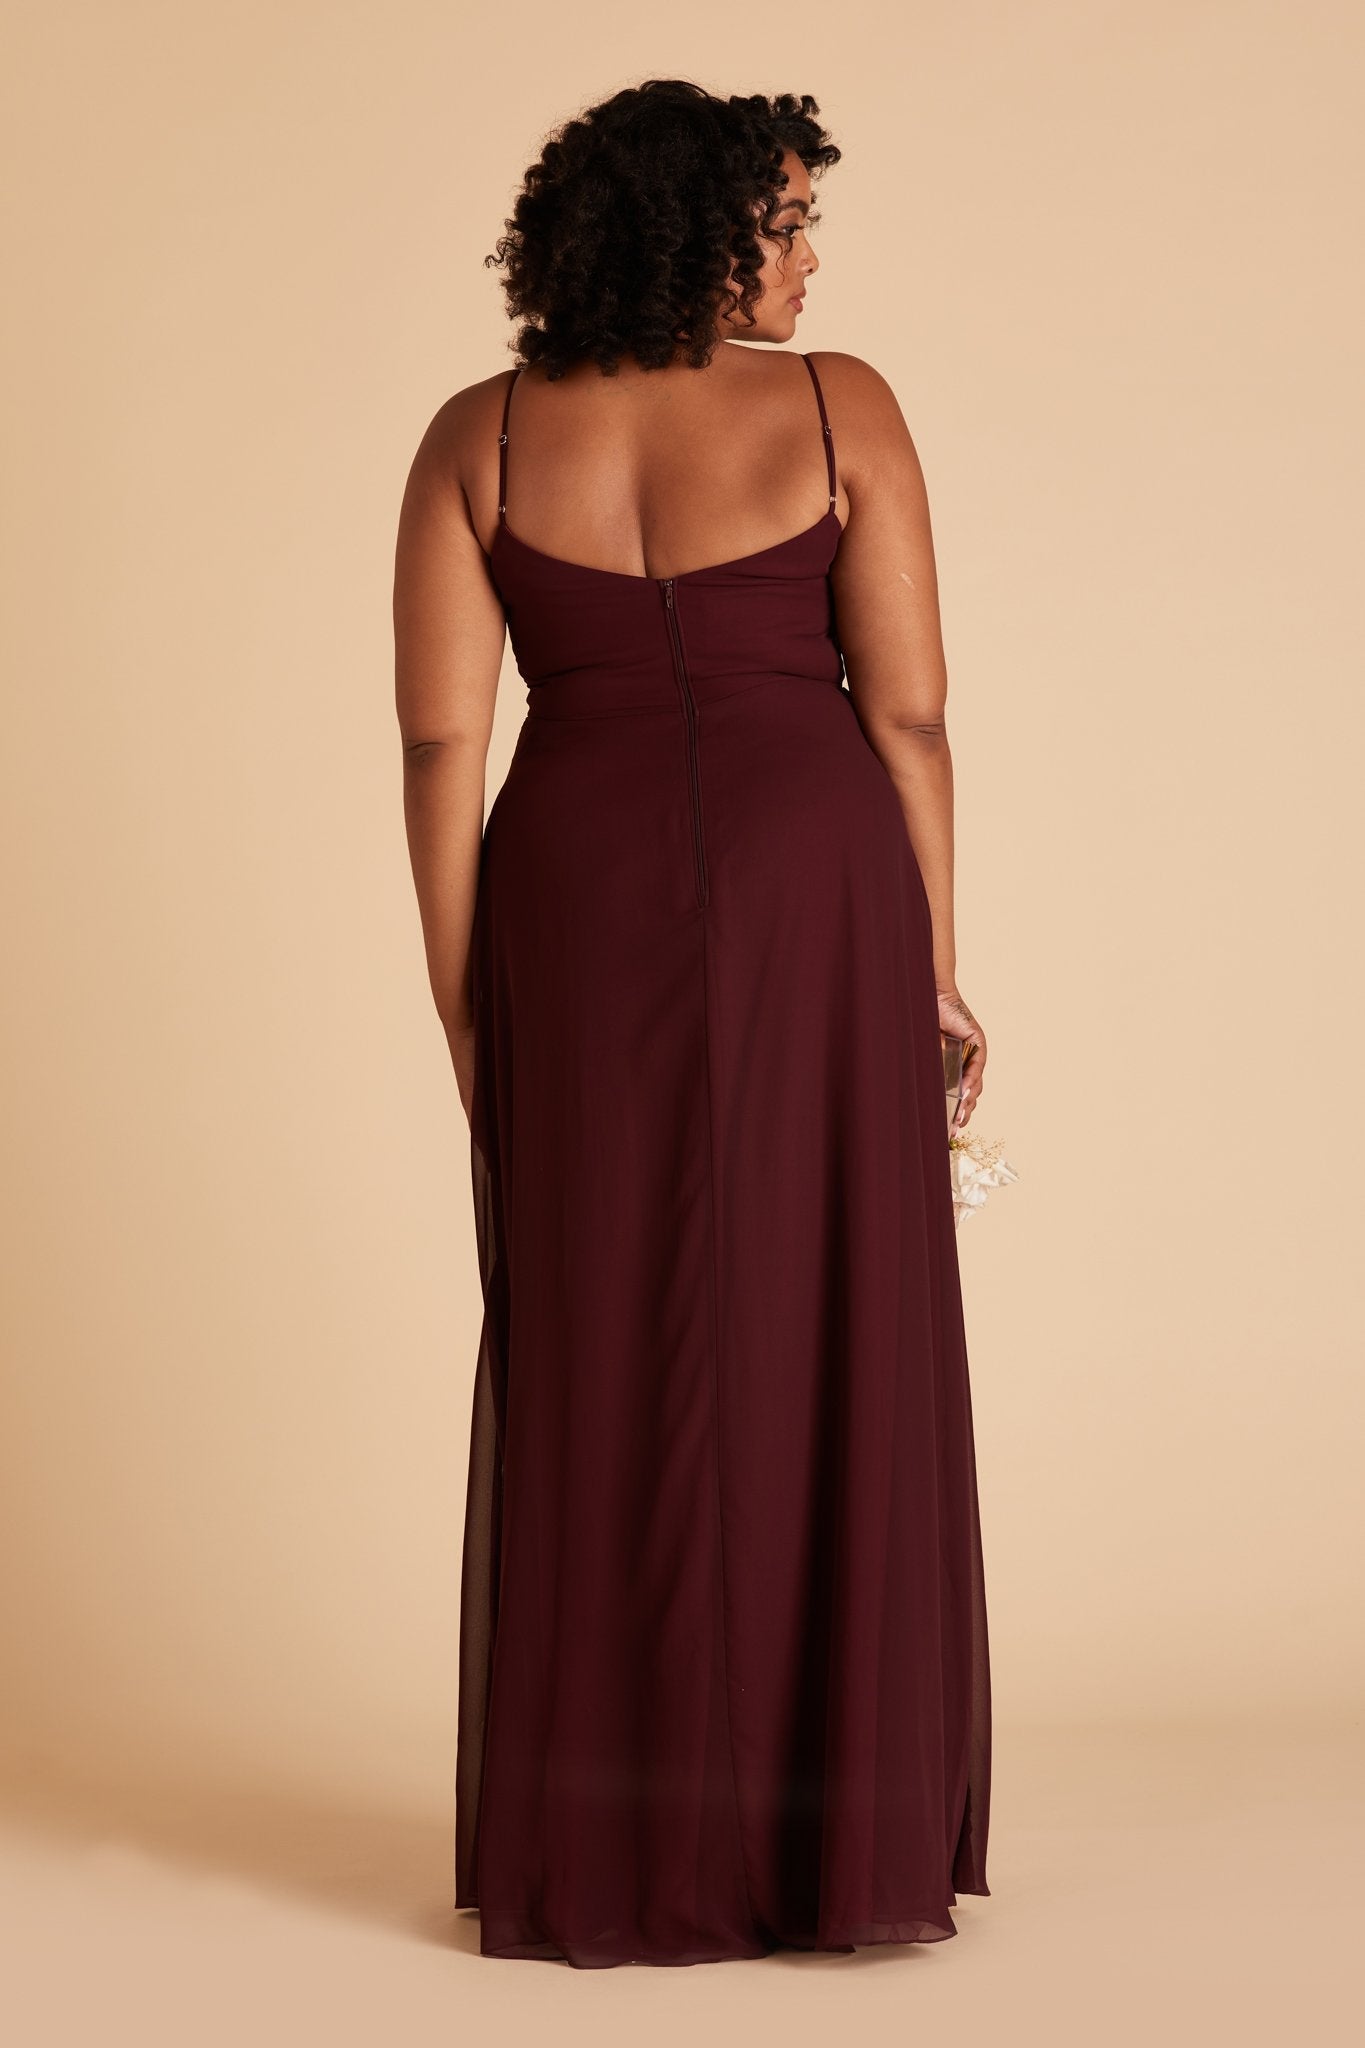 Devin convertible plus size bridesmaid dress in cabernet burgundy chiffon by Birdy Grey, back view